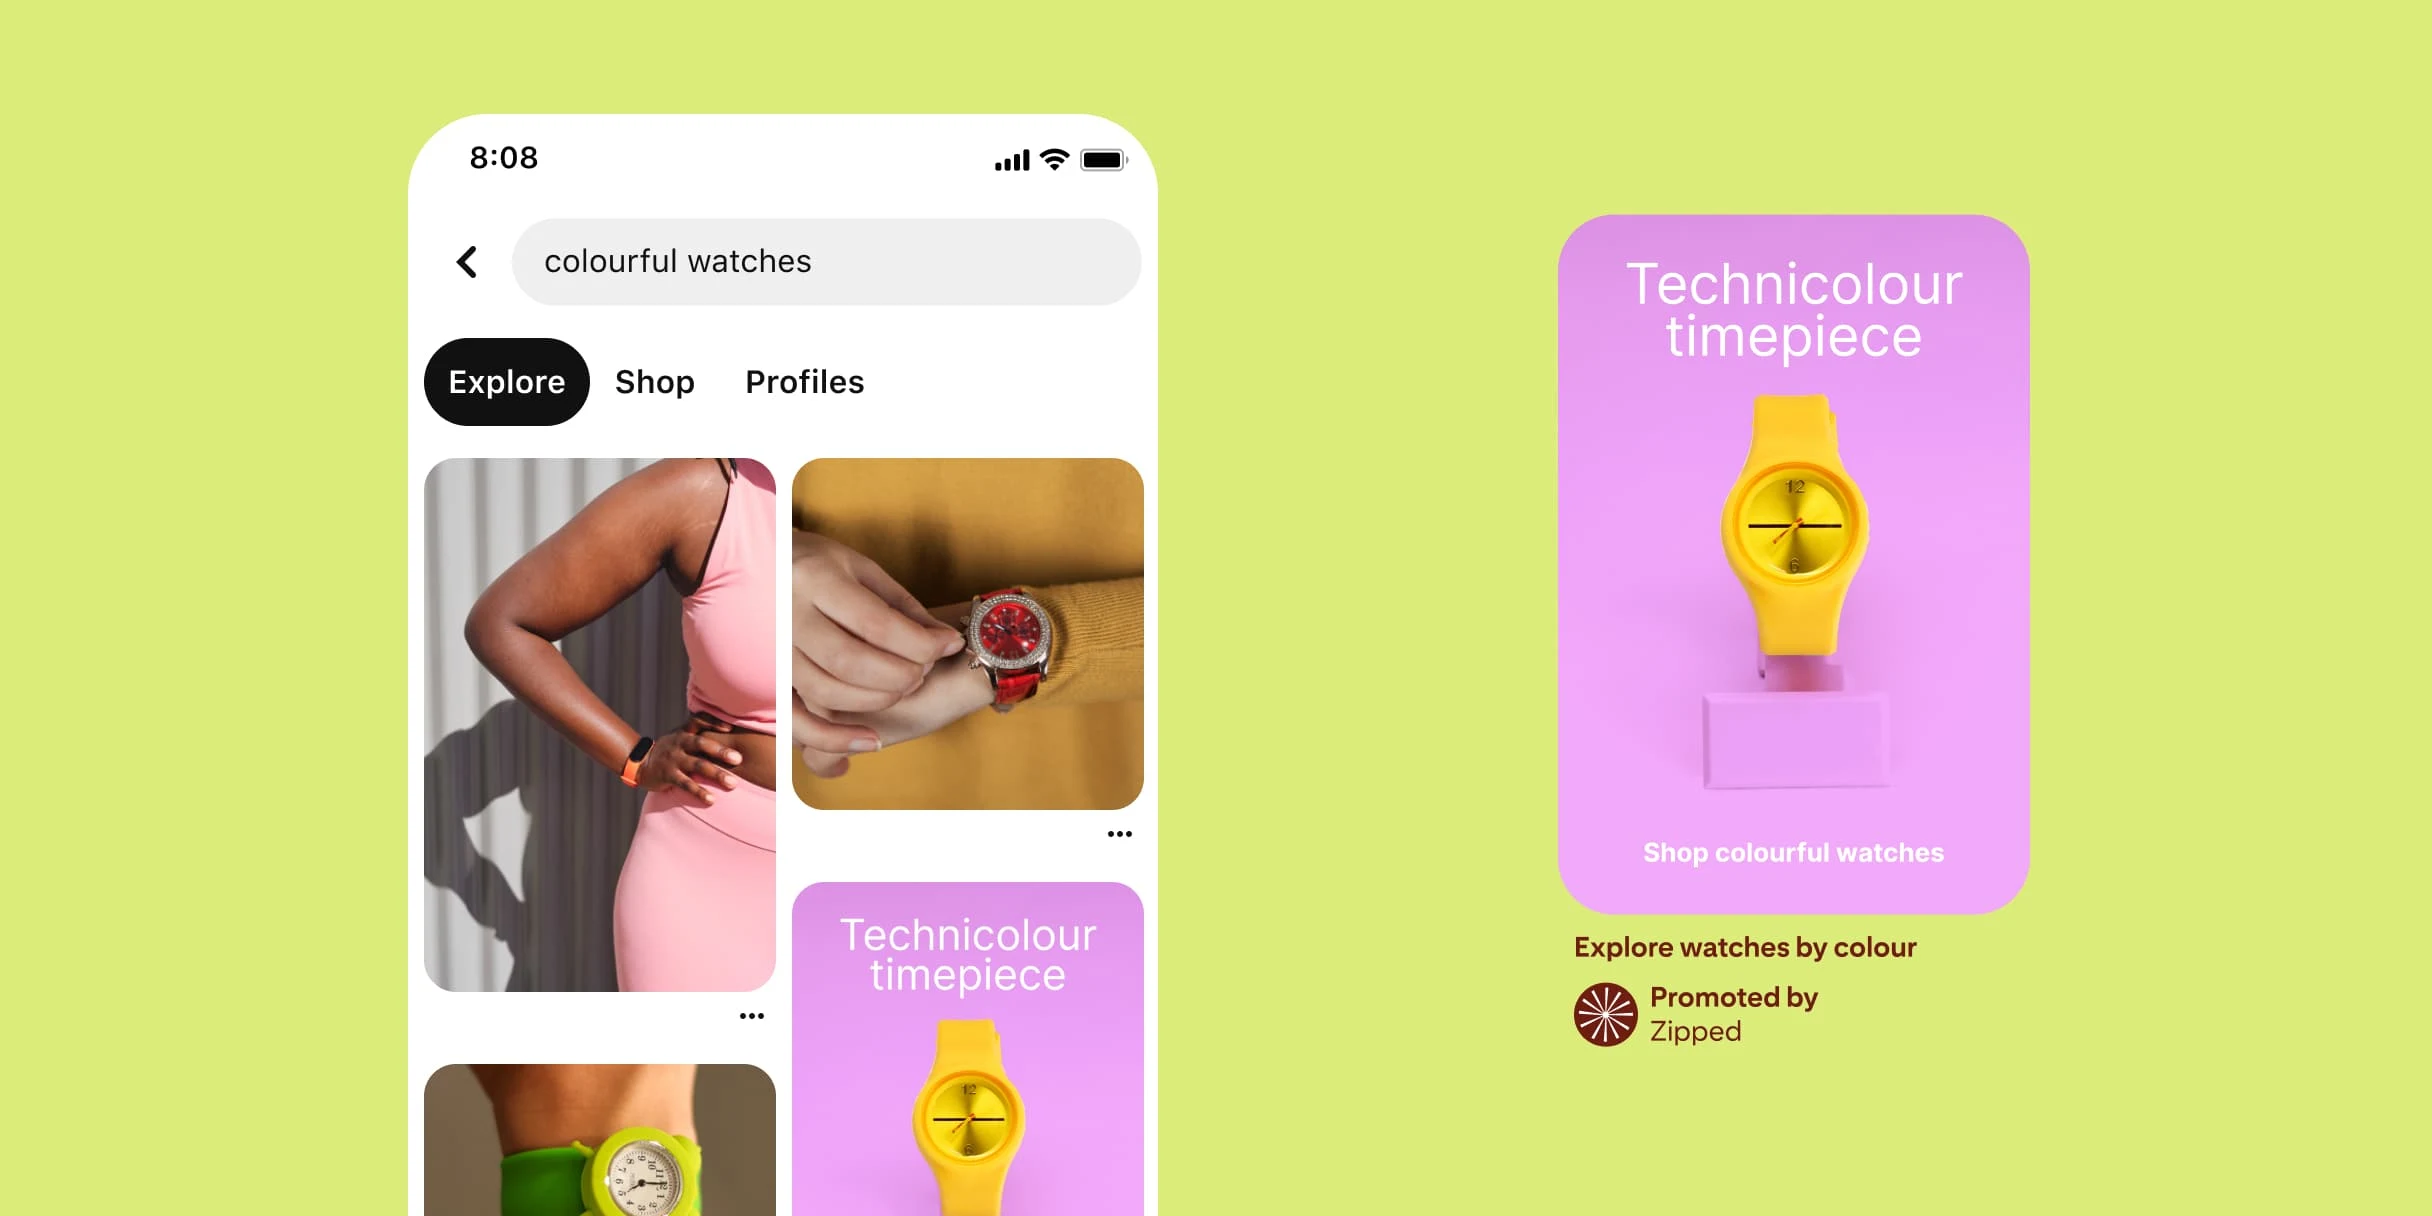 Pinterest search results for colourful watches. A Black woman in pink with a hand on her hip is wearing a pink wristwatch. White hands, one wearing a red wristwatch, the other wearing a green one, are on the top right and bottom left. A Pin of a yellow watch against a purple background, with the words ‘Technicolour timepiece’ above it, is on the right. Underneath, are the words ‘Shop colourful watches’. The description at the top reads ‘Explore watches by colour’.